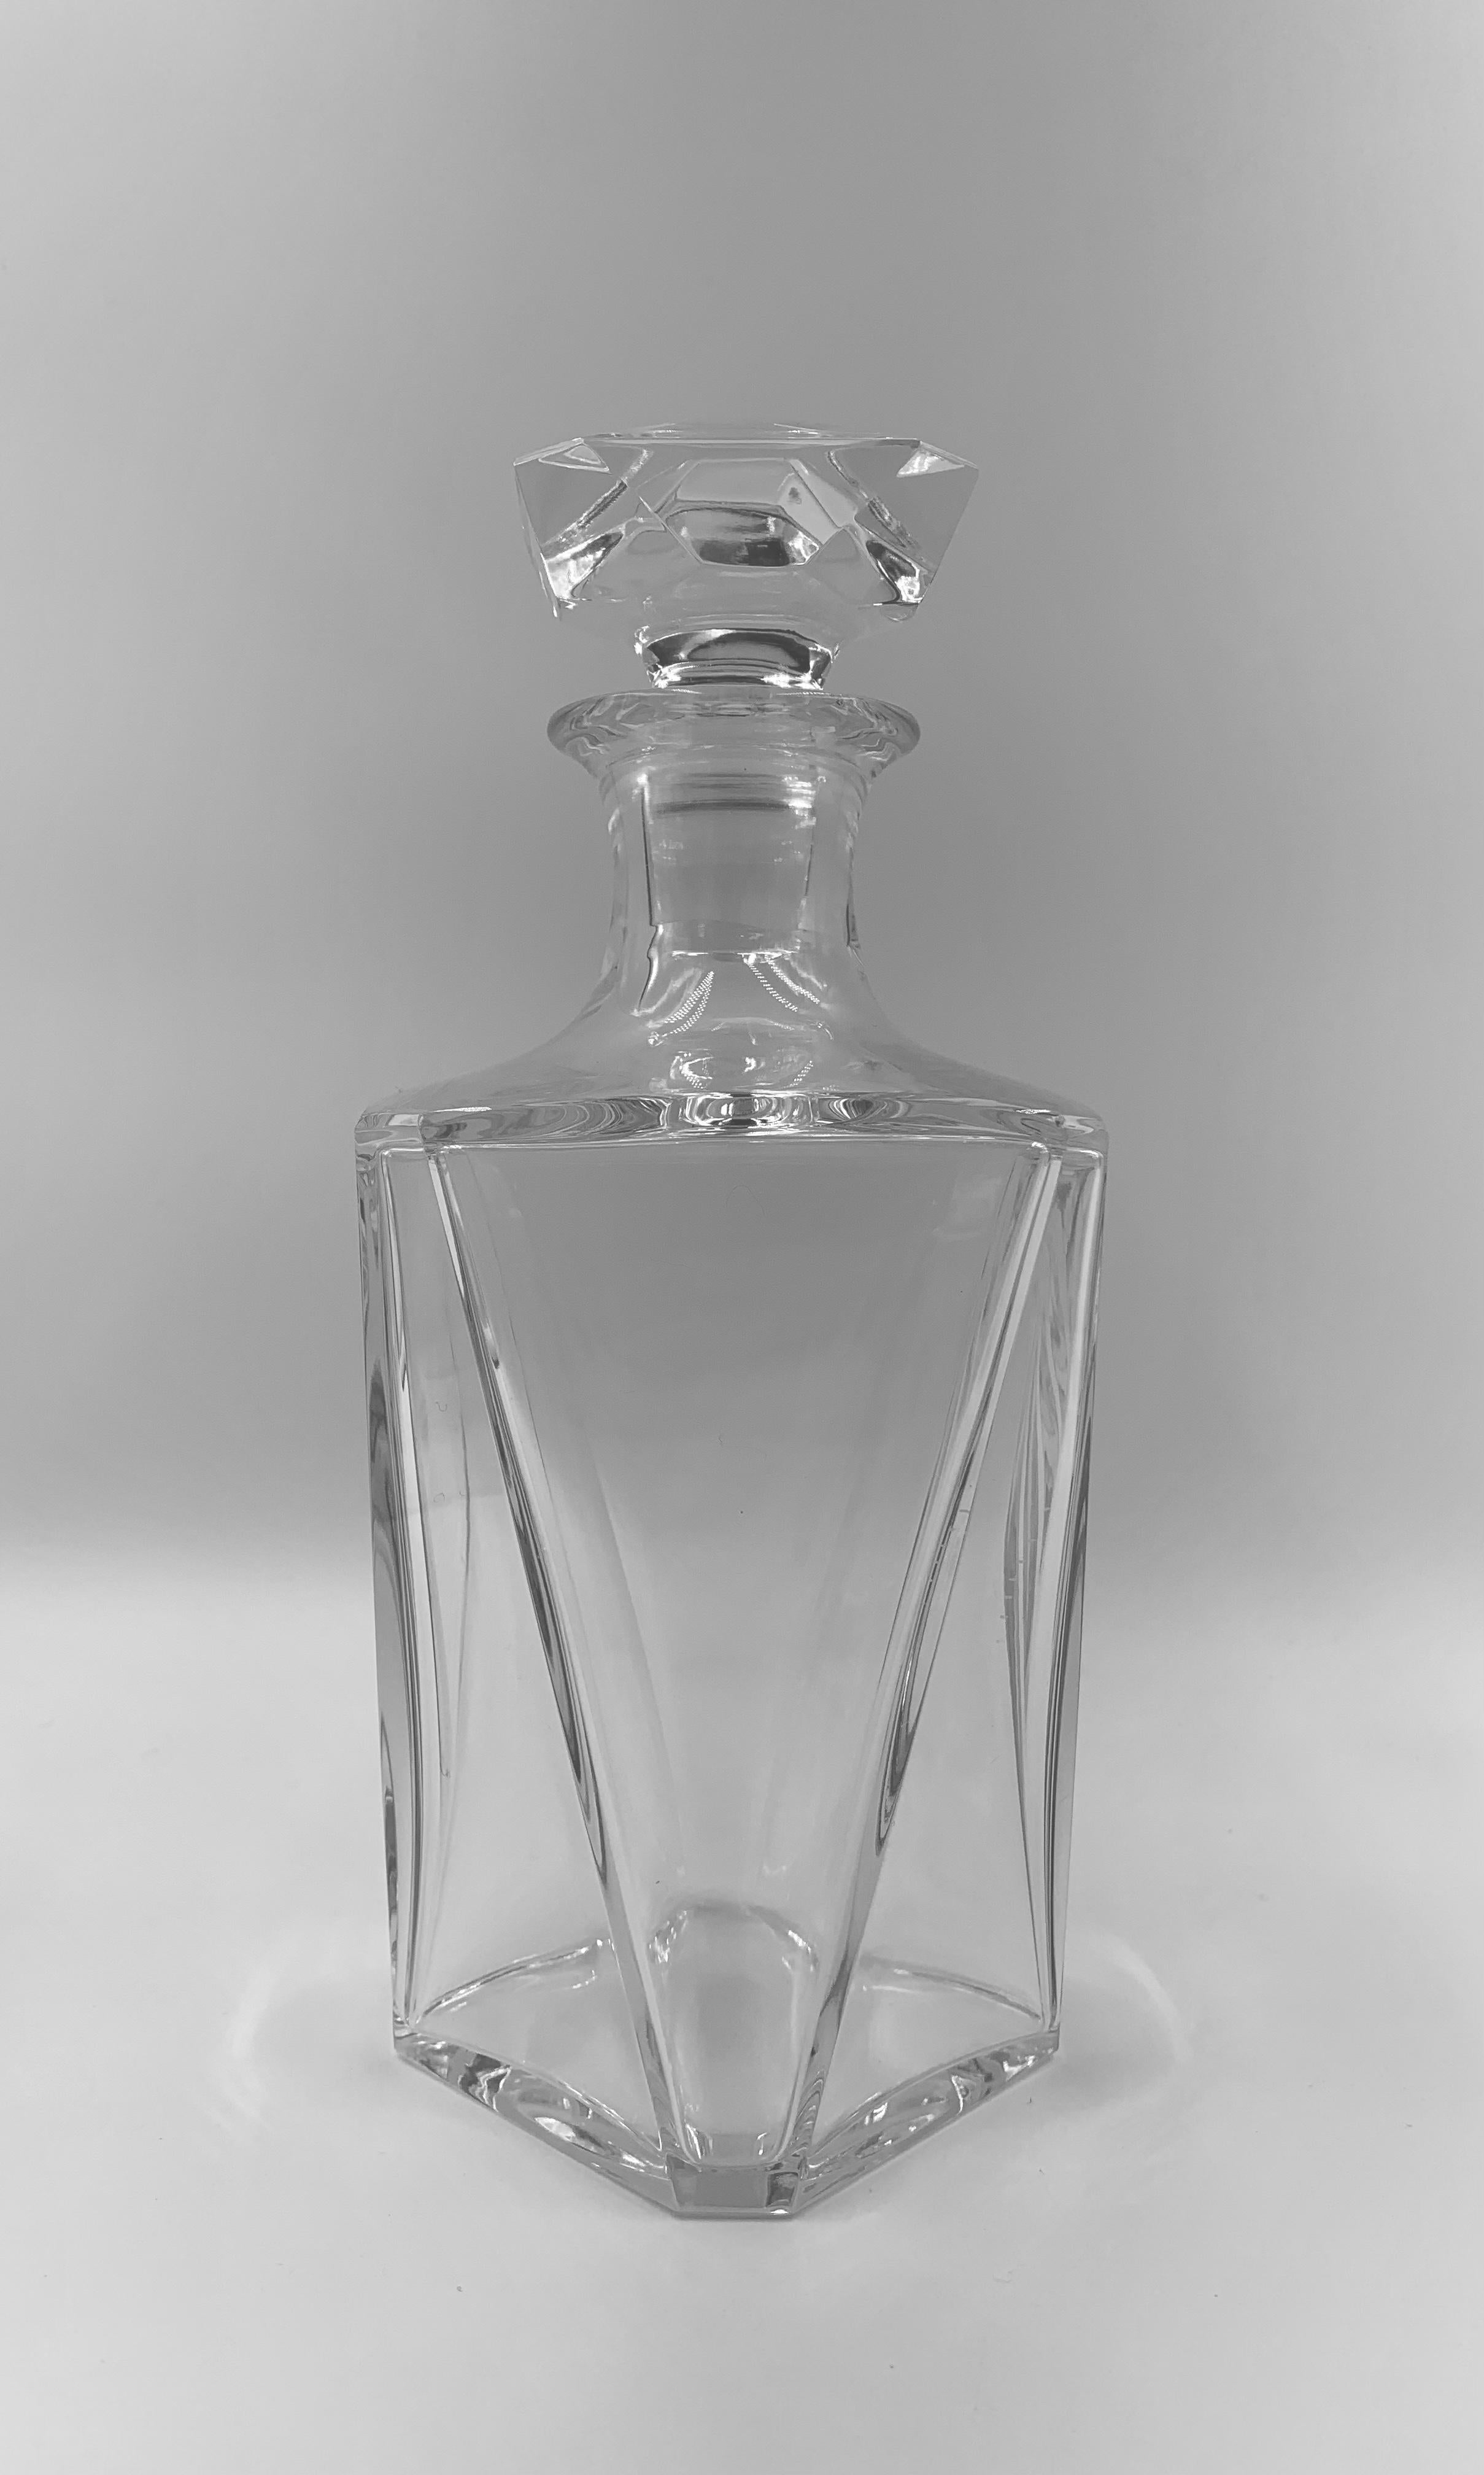 Mid Century Whiskey Decanter - 4 For Sale on 1stDibs